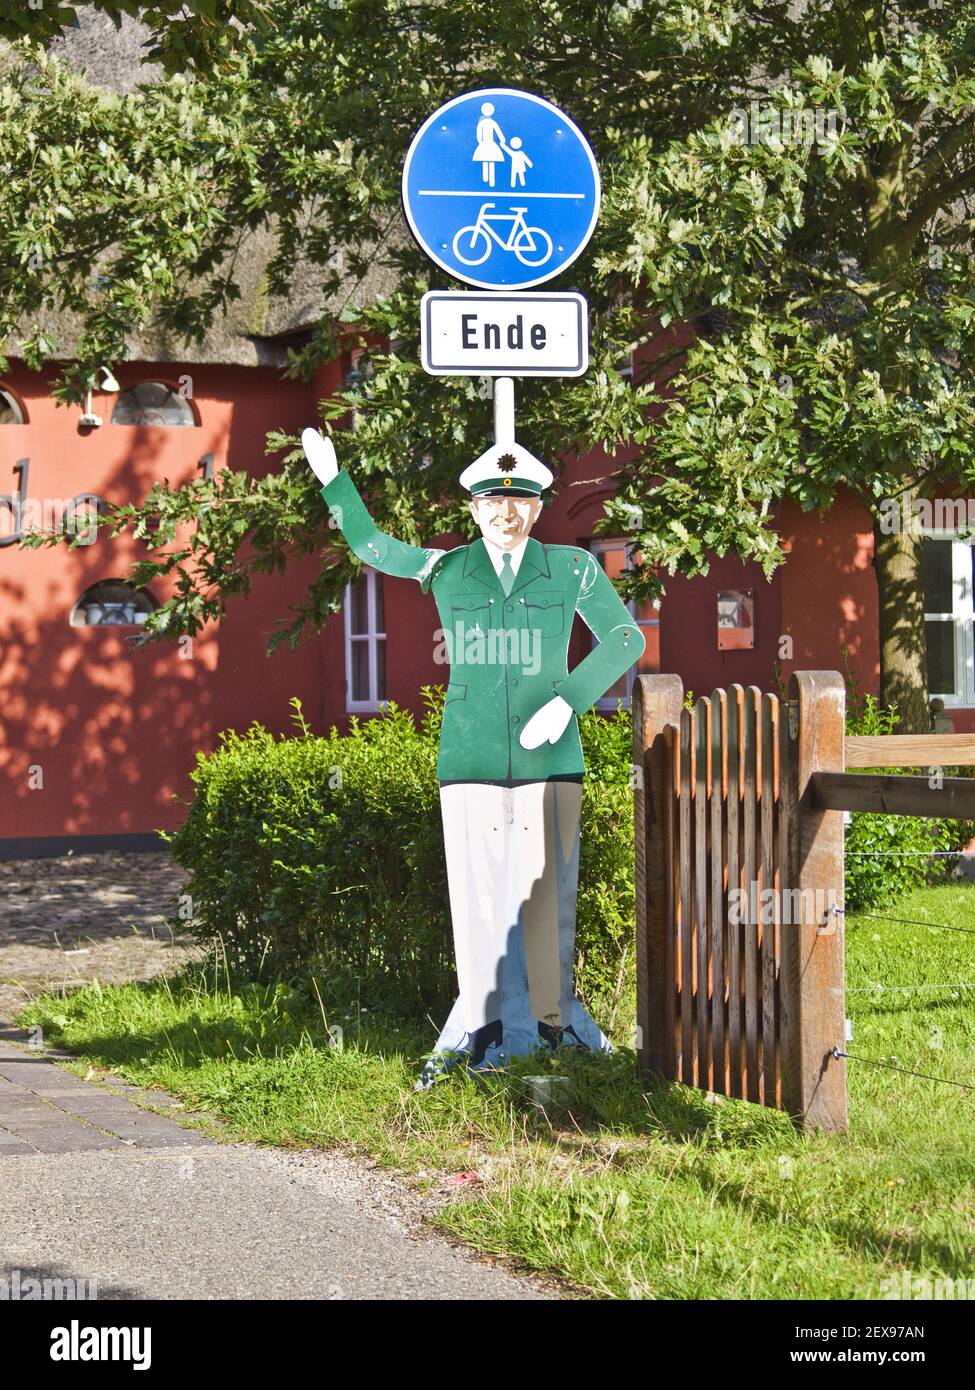 End of the Footway and Cycle Way in Nieblum, Germa Stock Photo